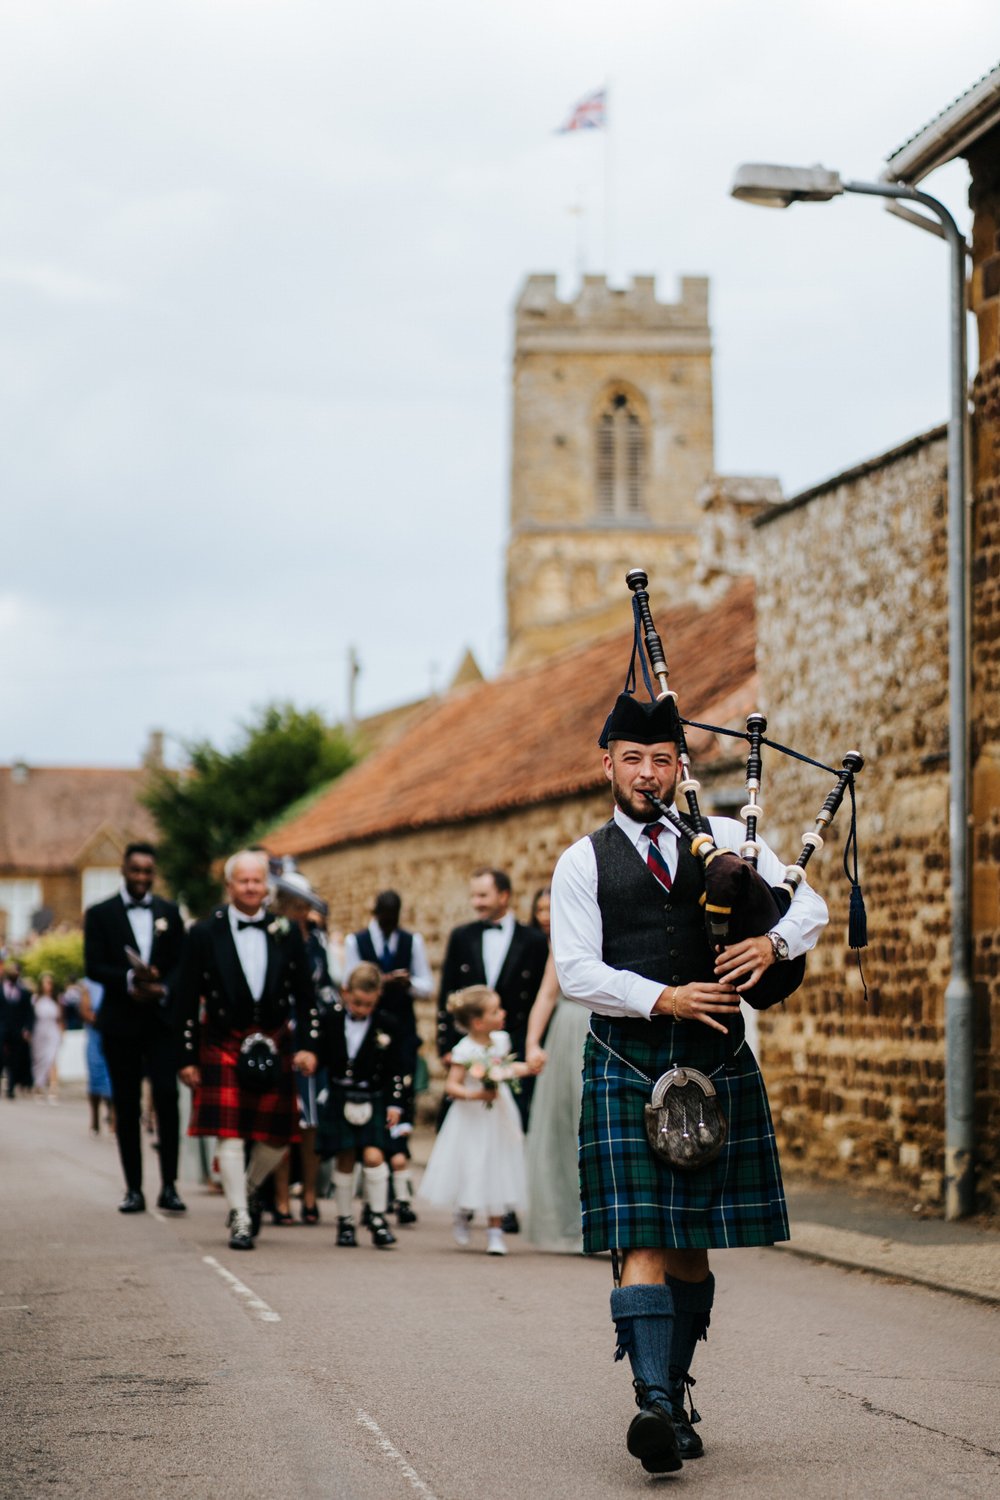 Traditional bagpiper leads procession of guests to wedding venue in Little Houghton